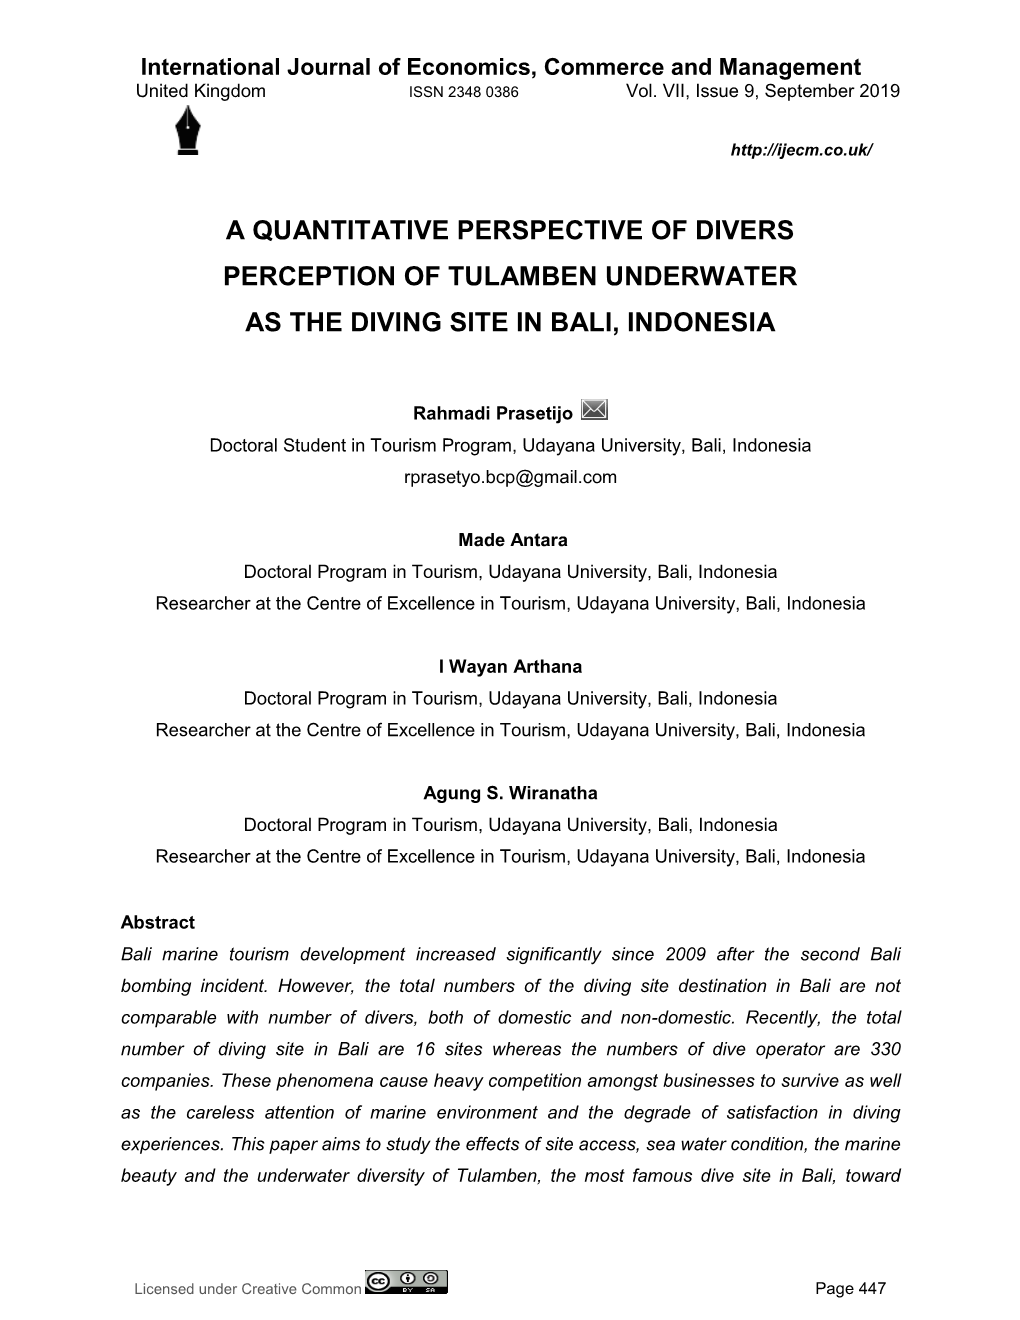 A Quantitative Perspective of Divers Perception of Tulamben Underwater As the Diving Site in Bali, Indonesia